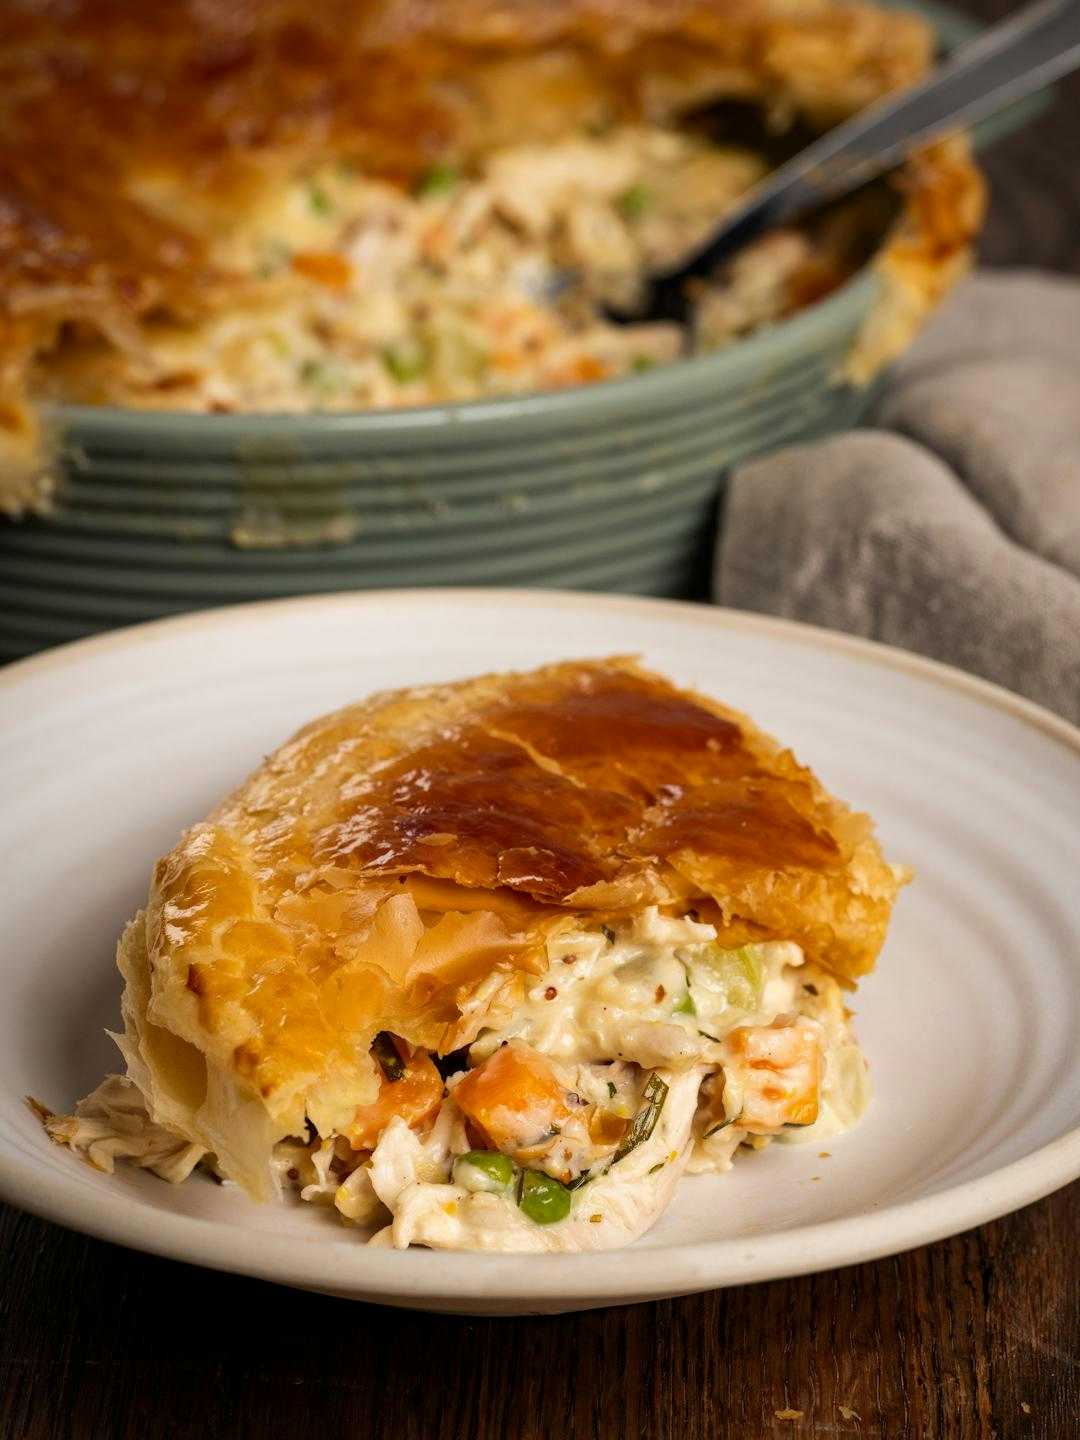 The Ultimate Chicken Pot Pie